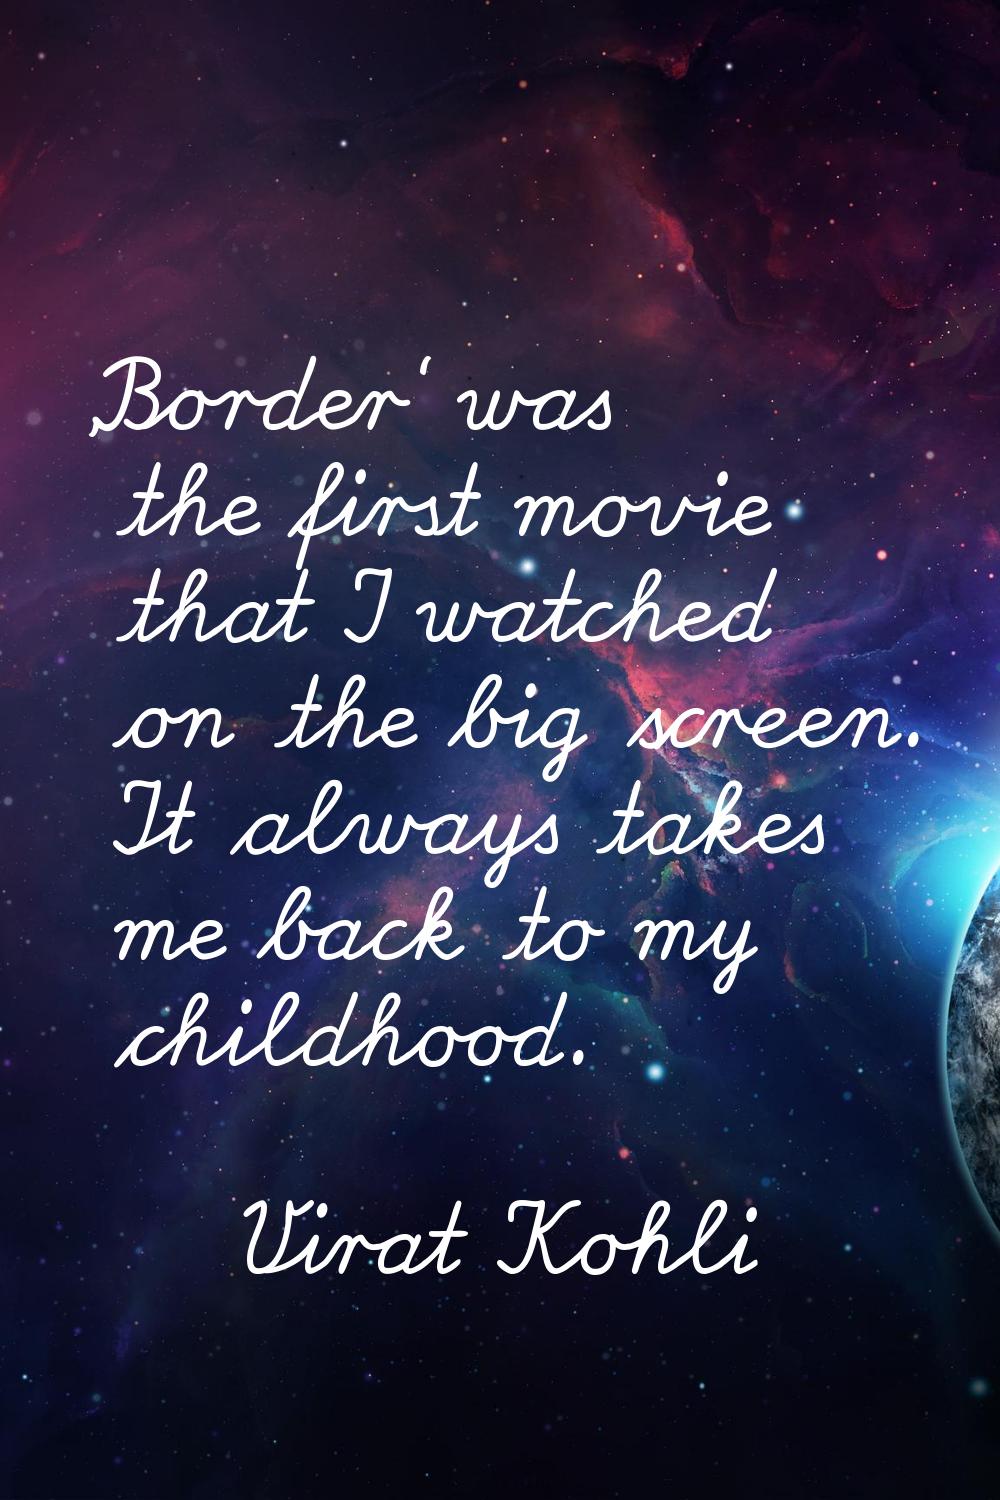 'Border' was the first movie that I watched on the big screen. It always takes me back to my childh